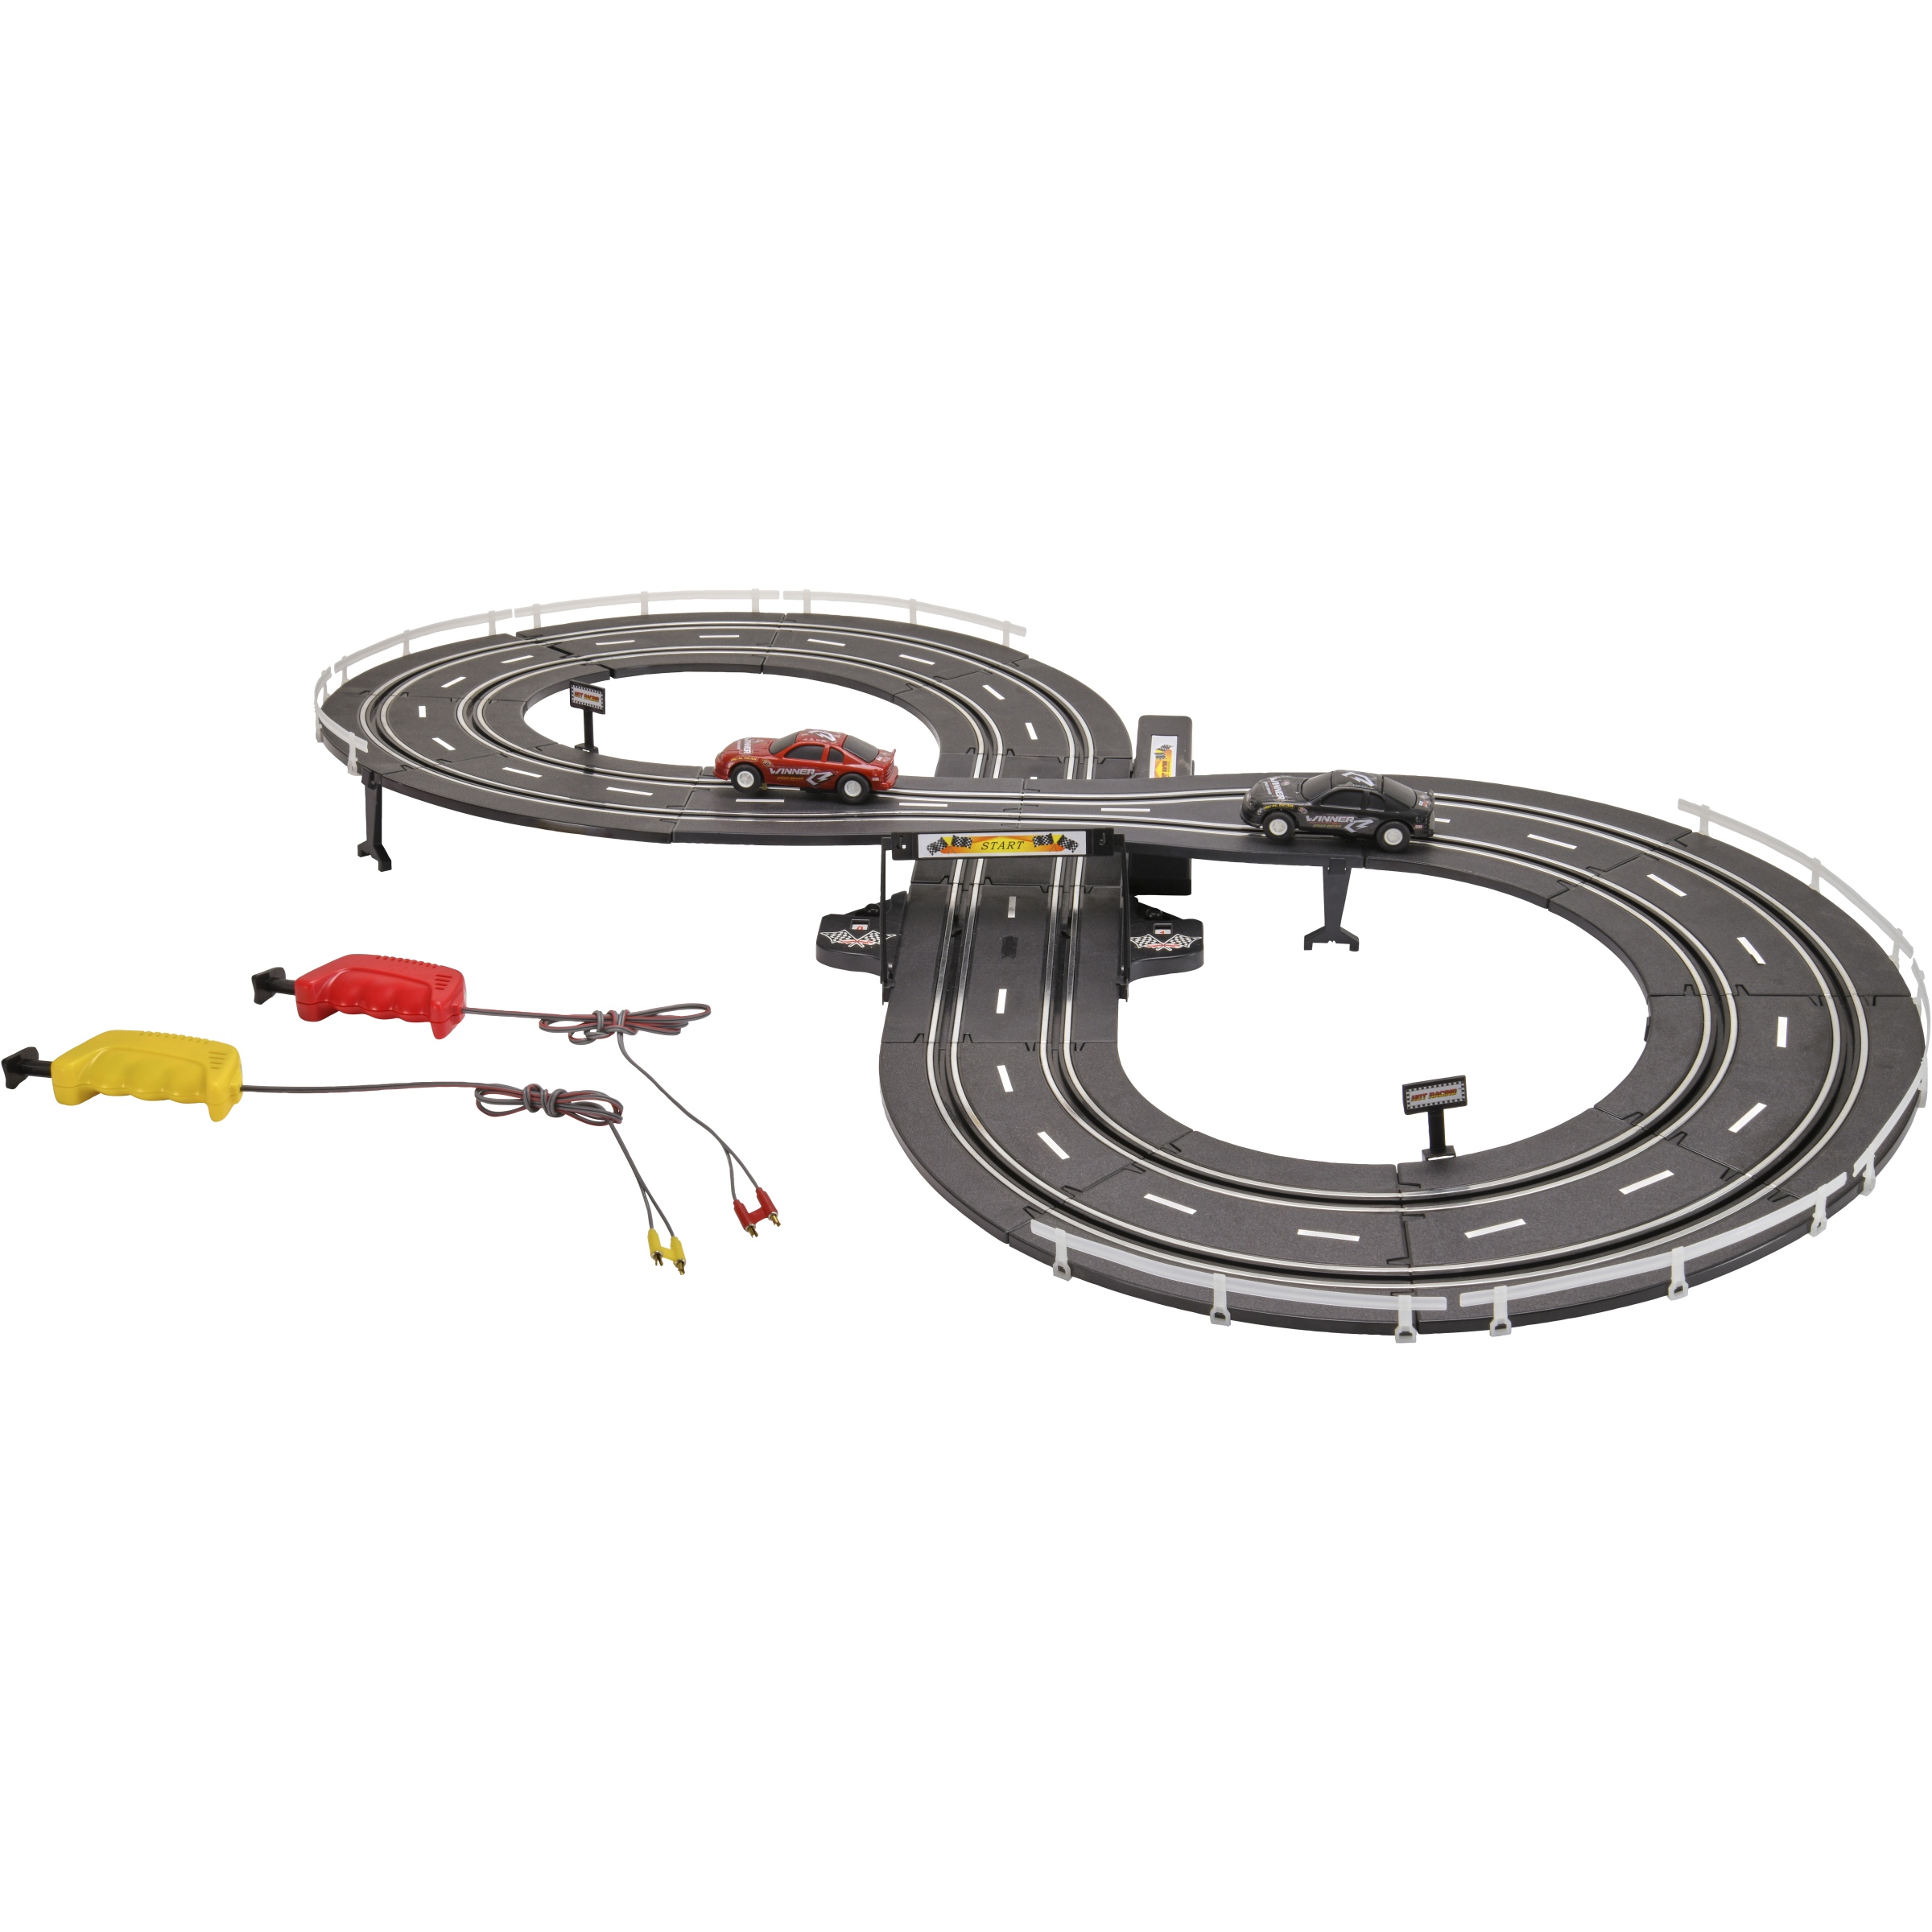 Kid Connection 37-Piece Road Racing Track Play Set, Battery Operated - image 1 of 4